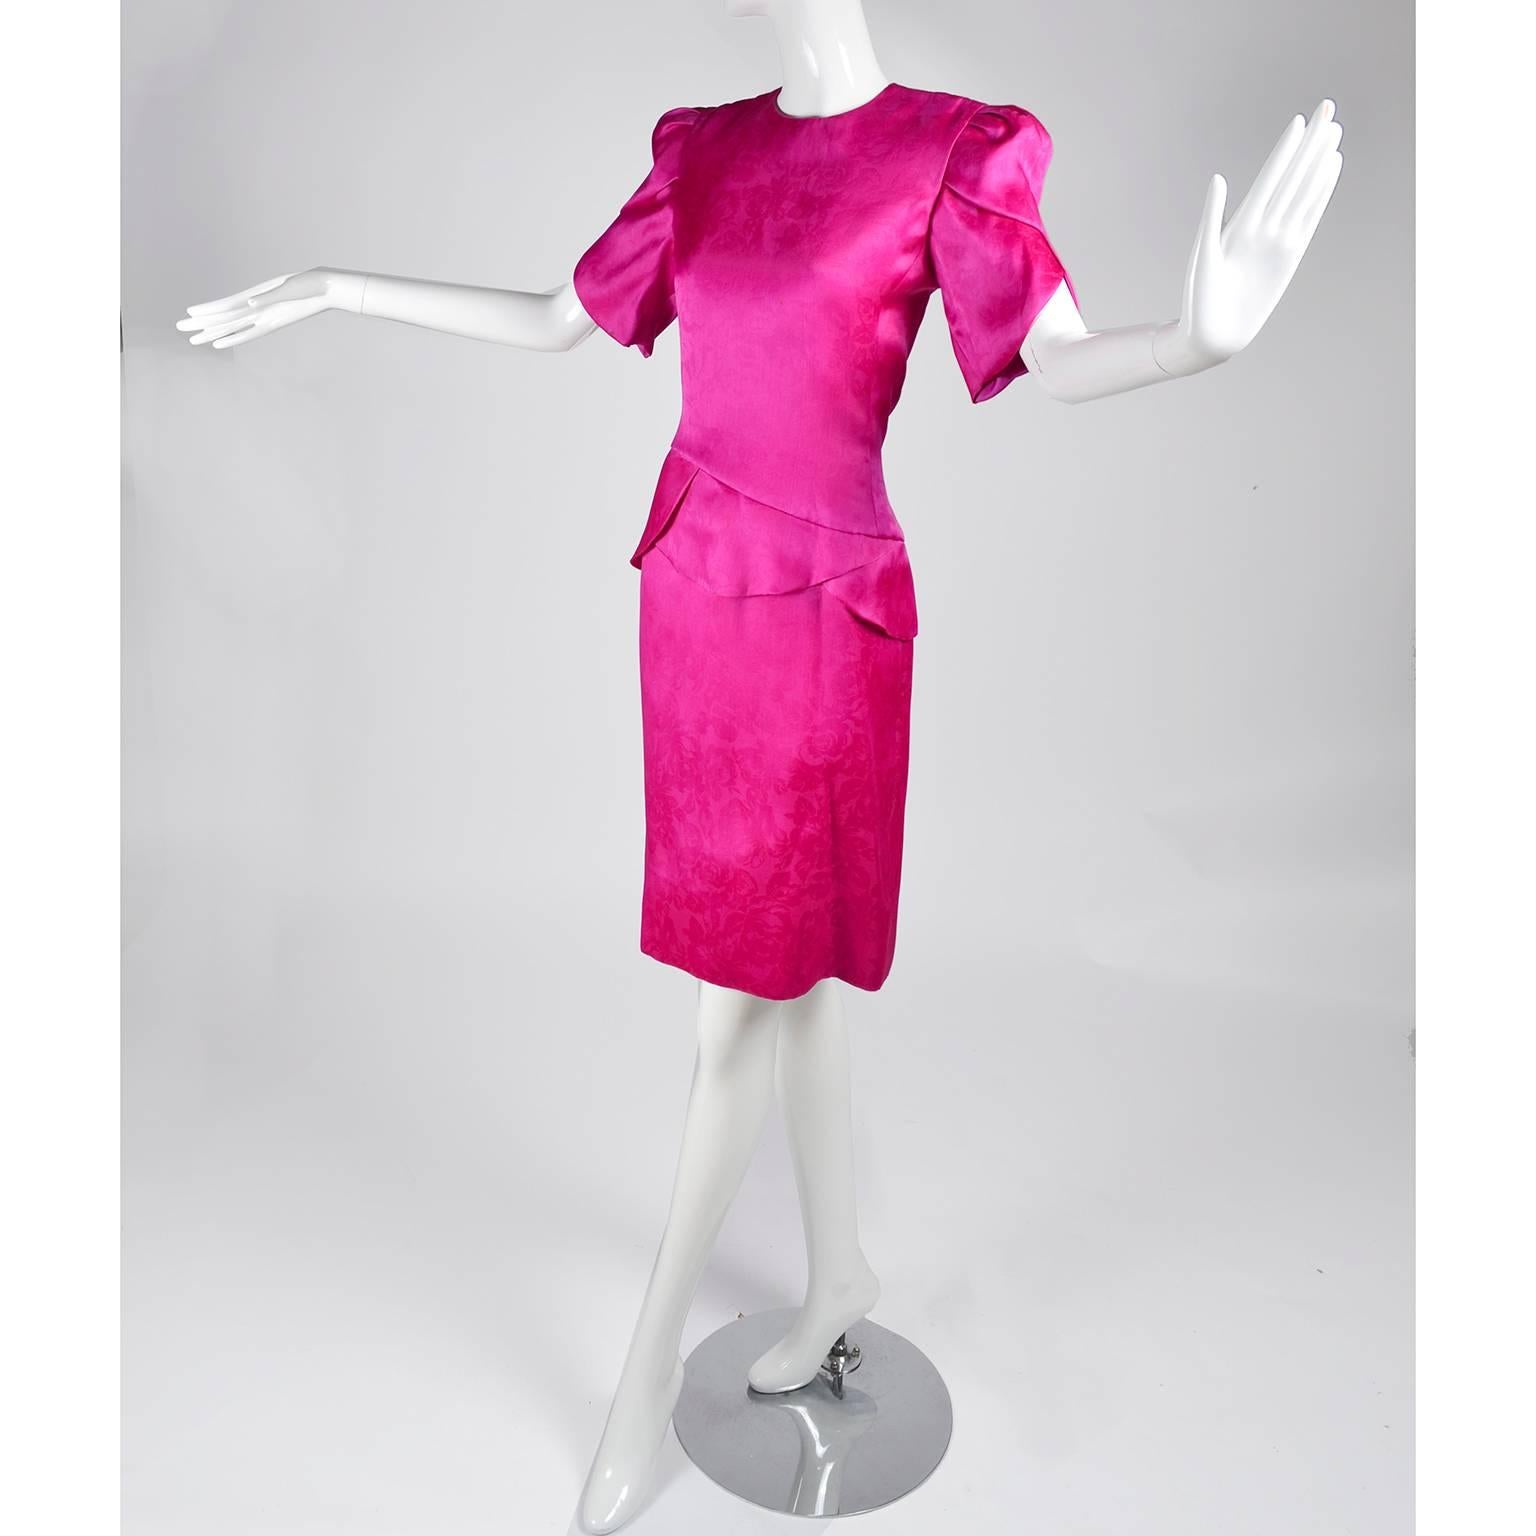 1990s Carolina Herrera Silk Dress in Pink Jacquard Print MOB or Wedding Guest In Excellent Condition For Sale In Portland, OR